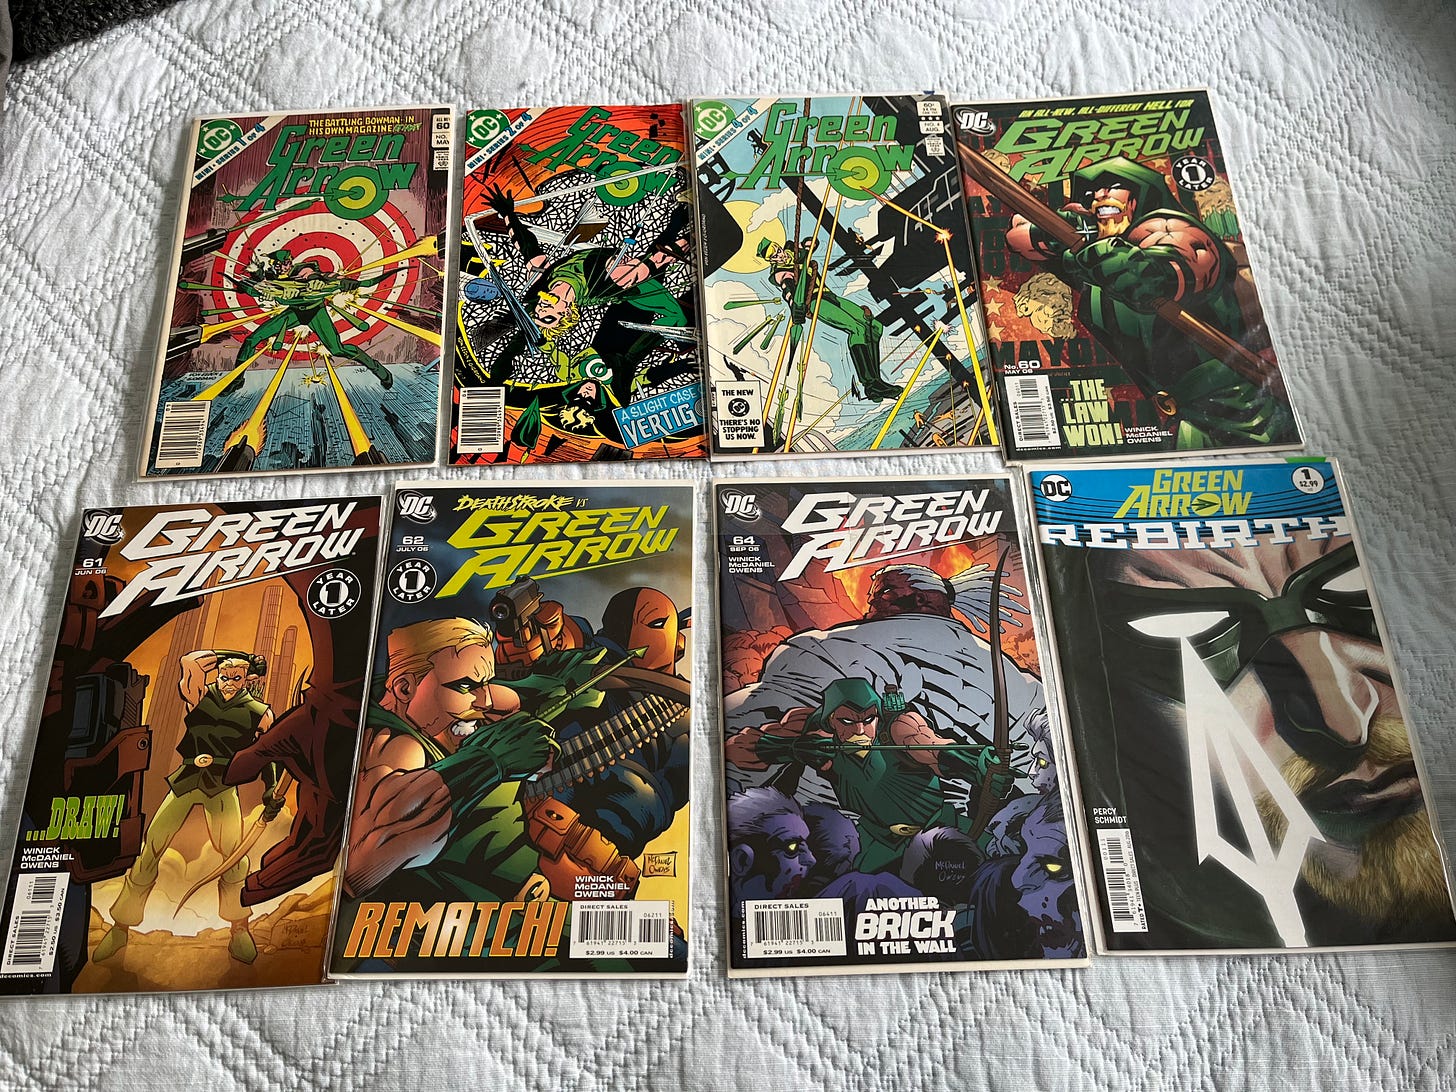 Eight issues of Green Arrow comics ranging from the 1980s to 2016